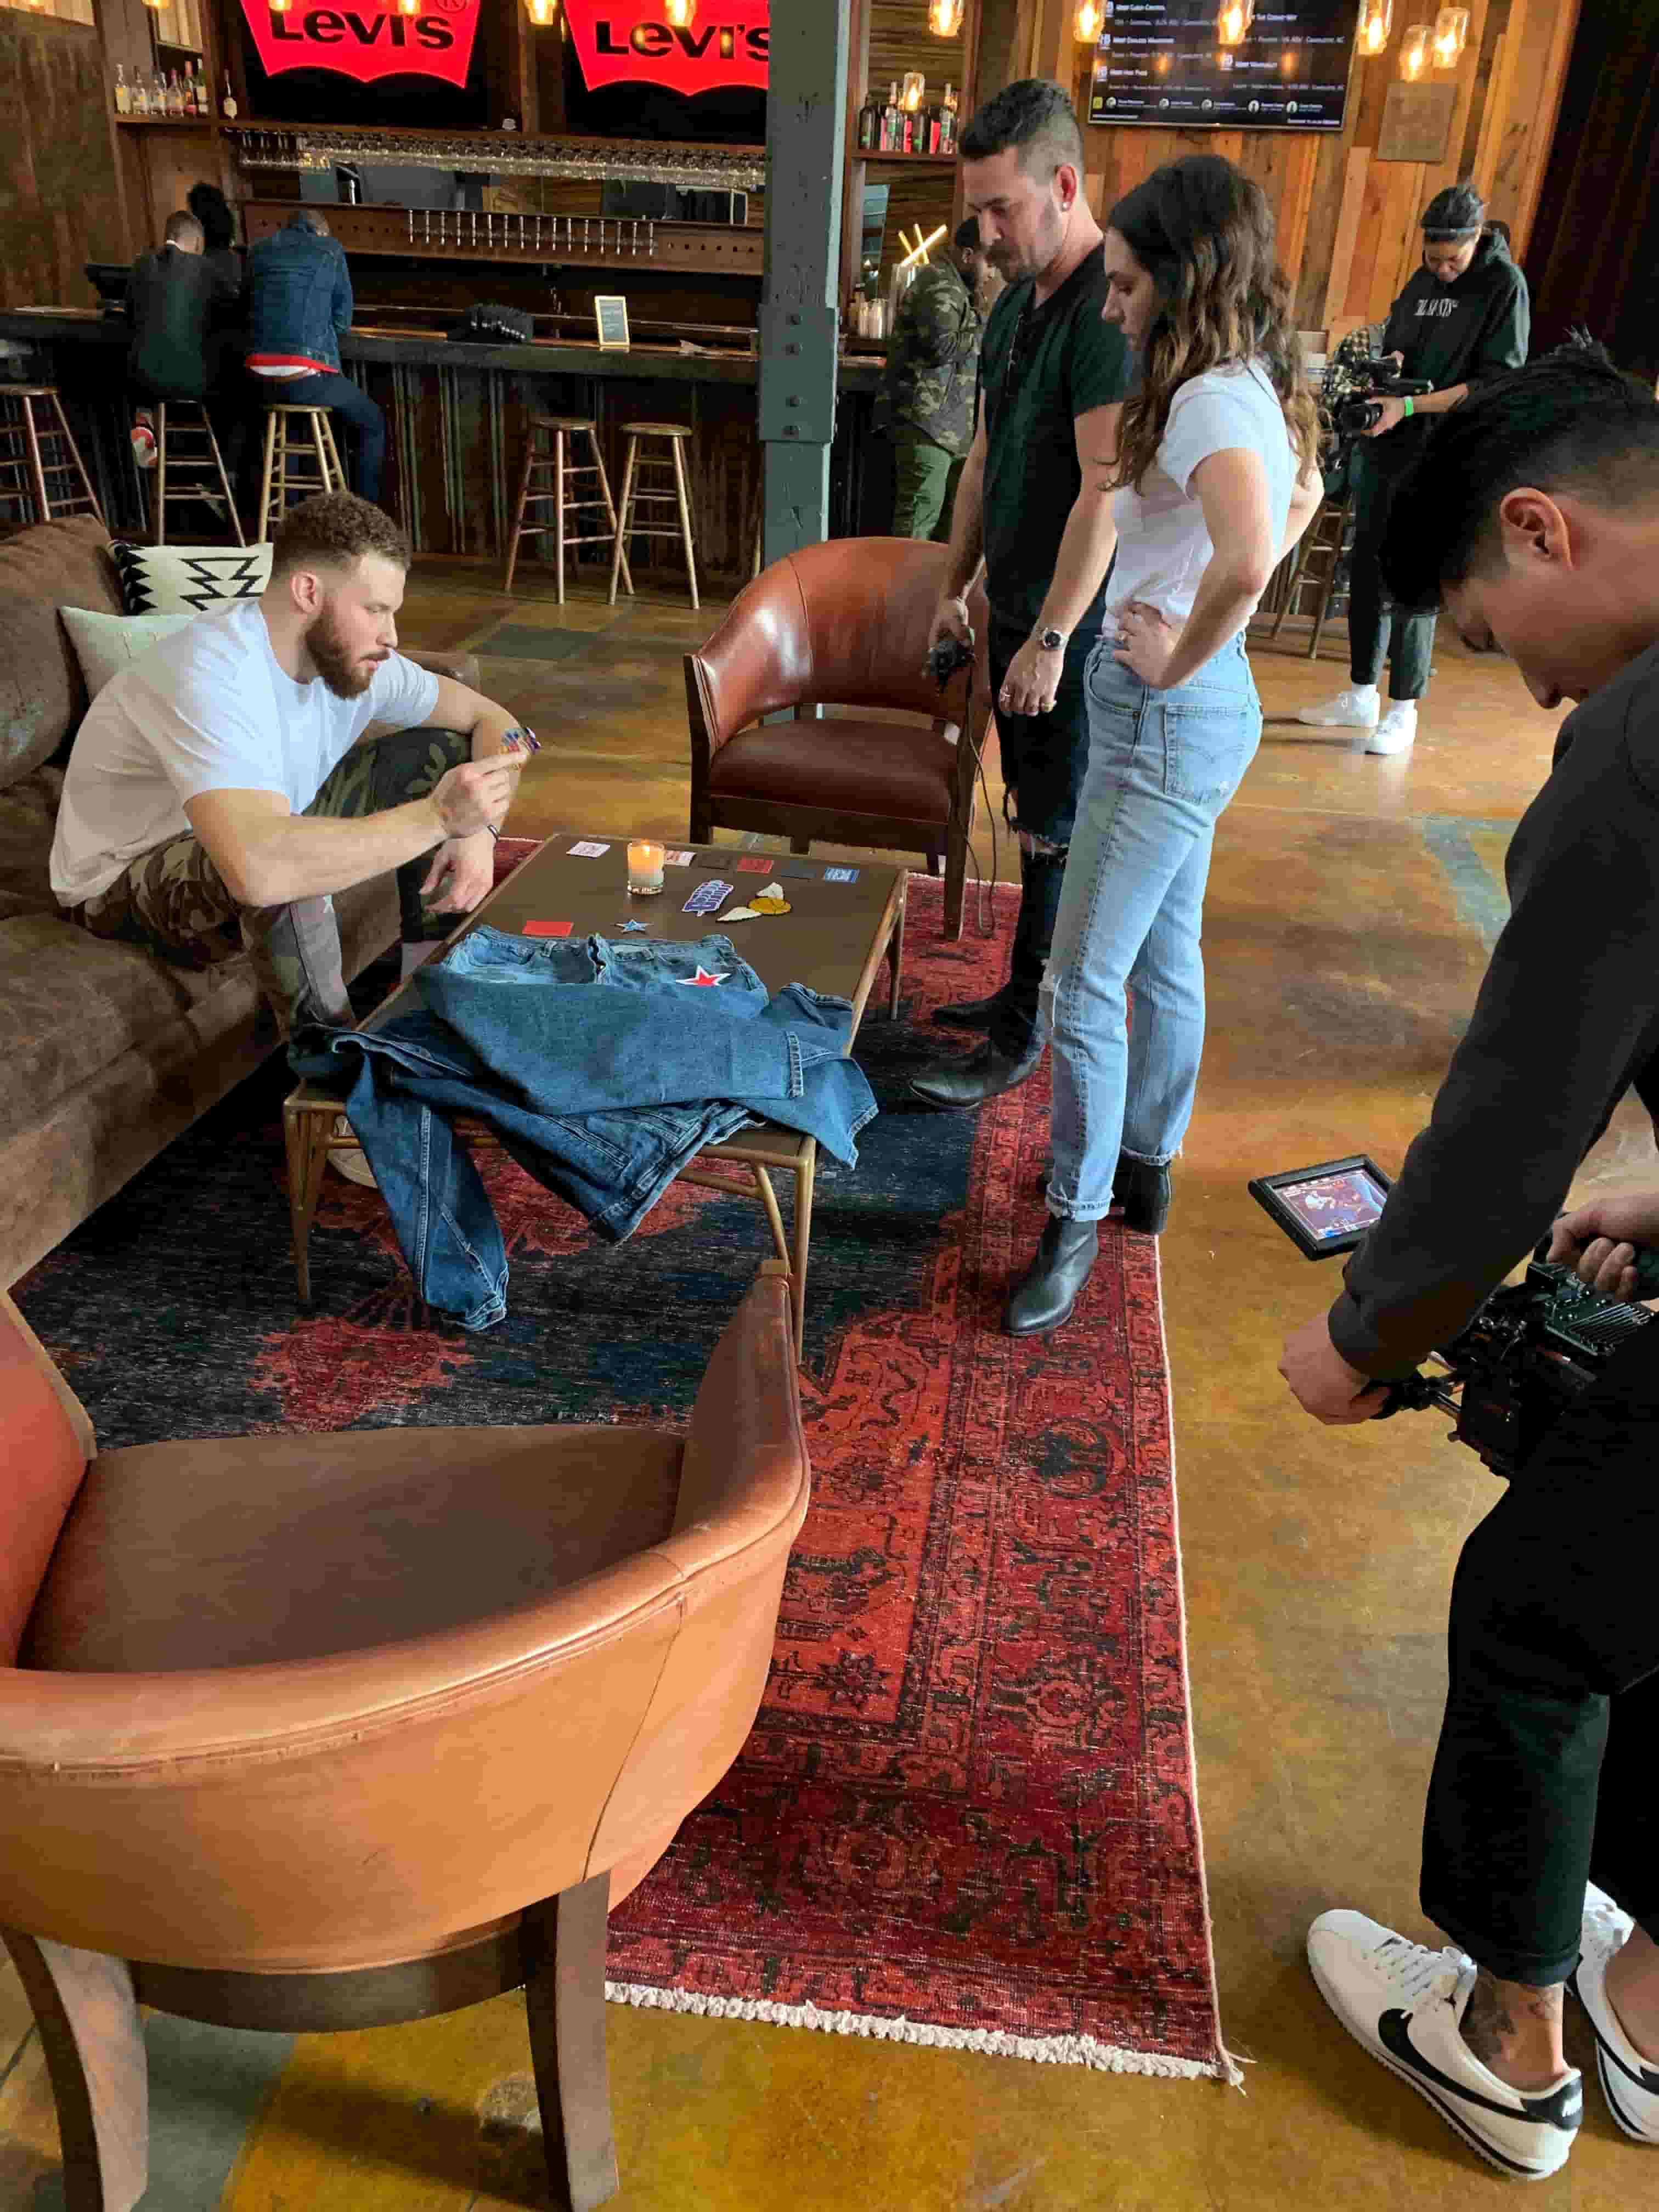 Blake Griffin on couch with Levi's